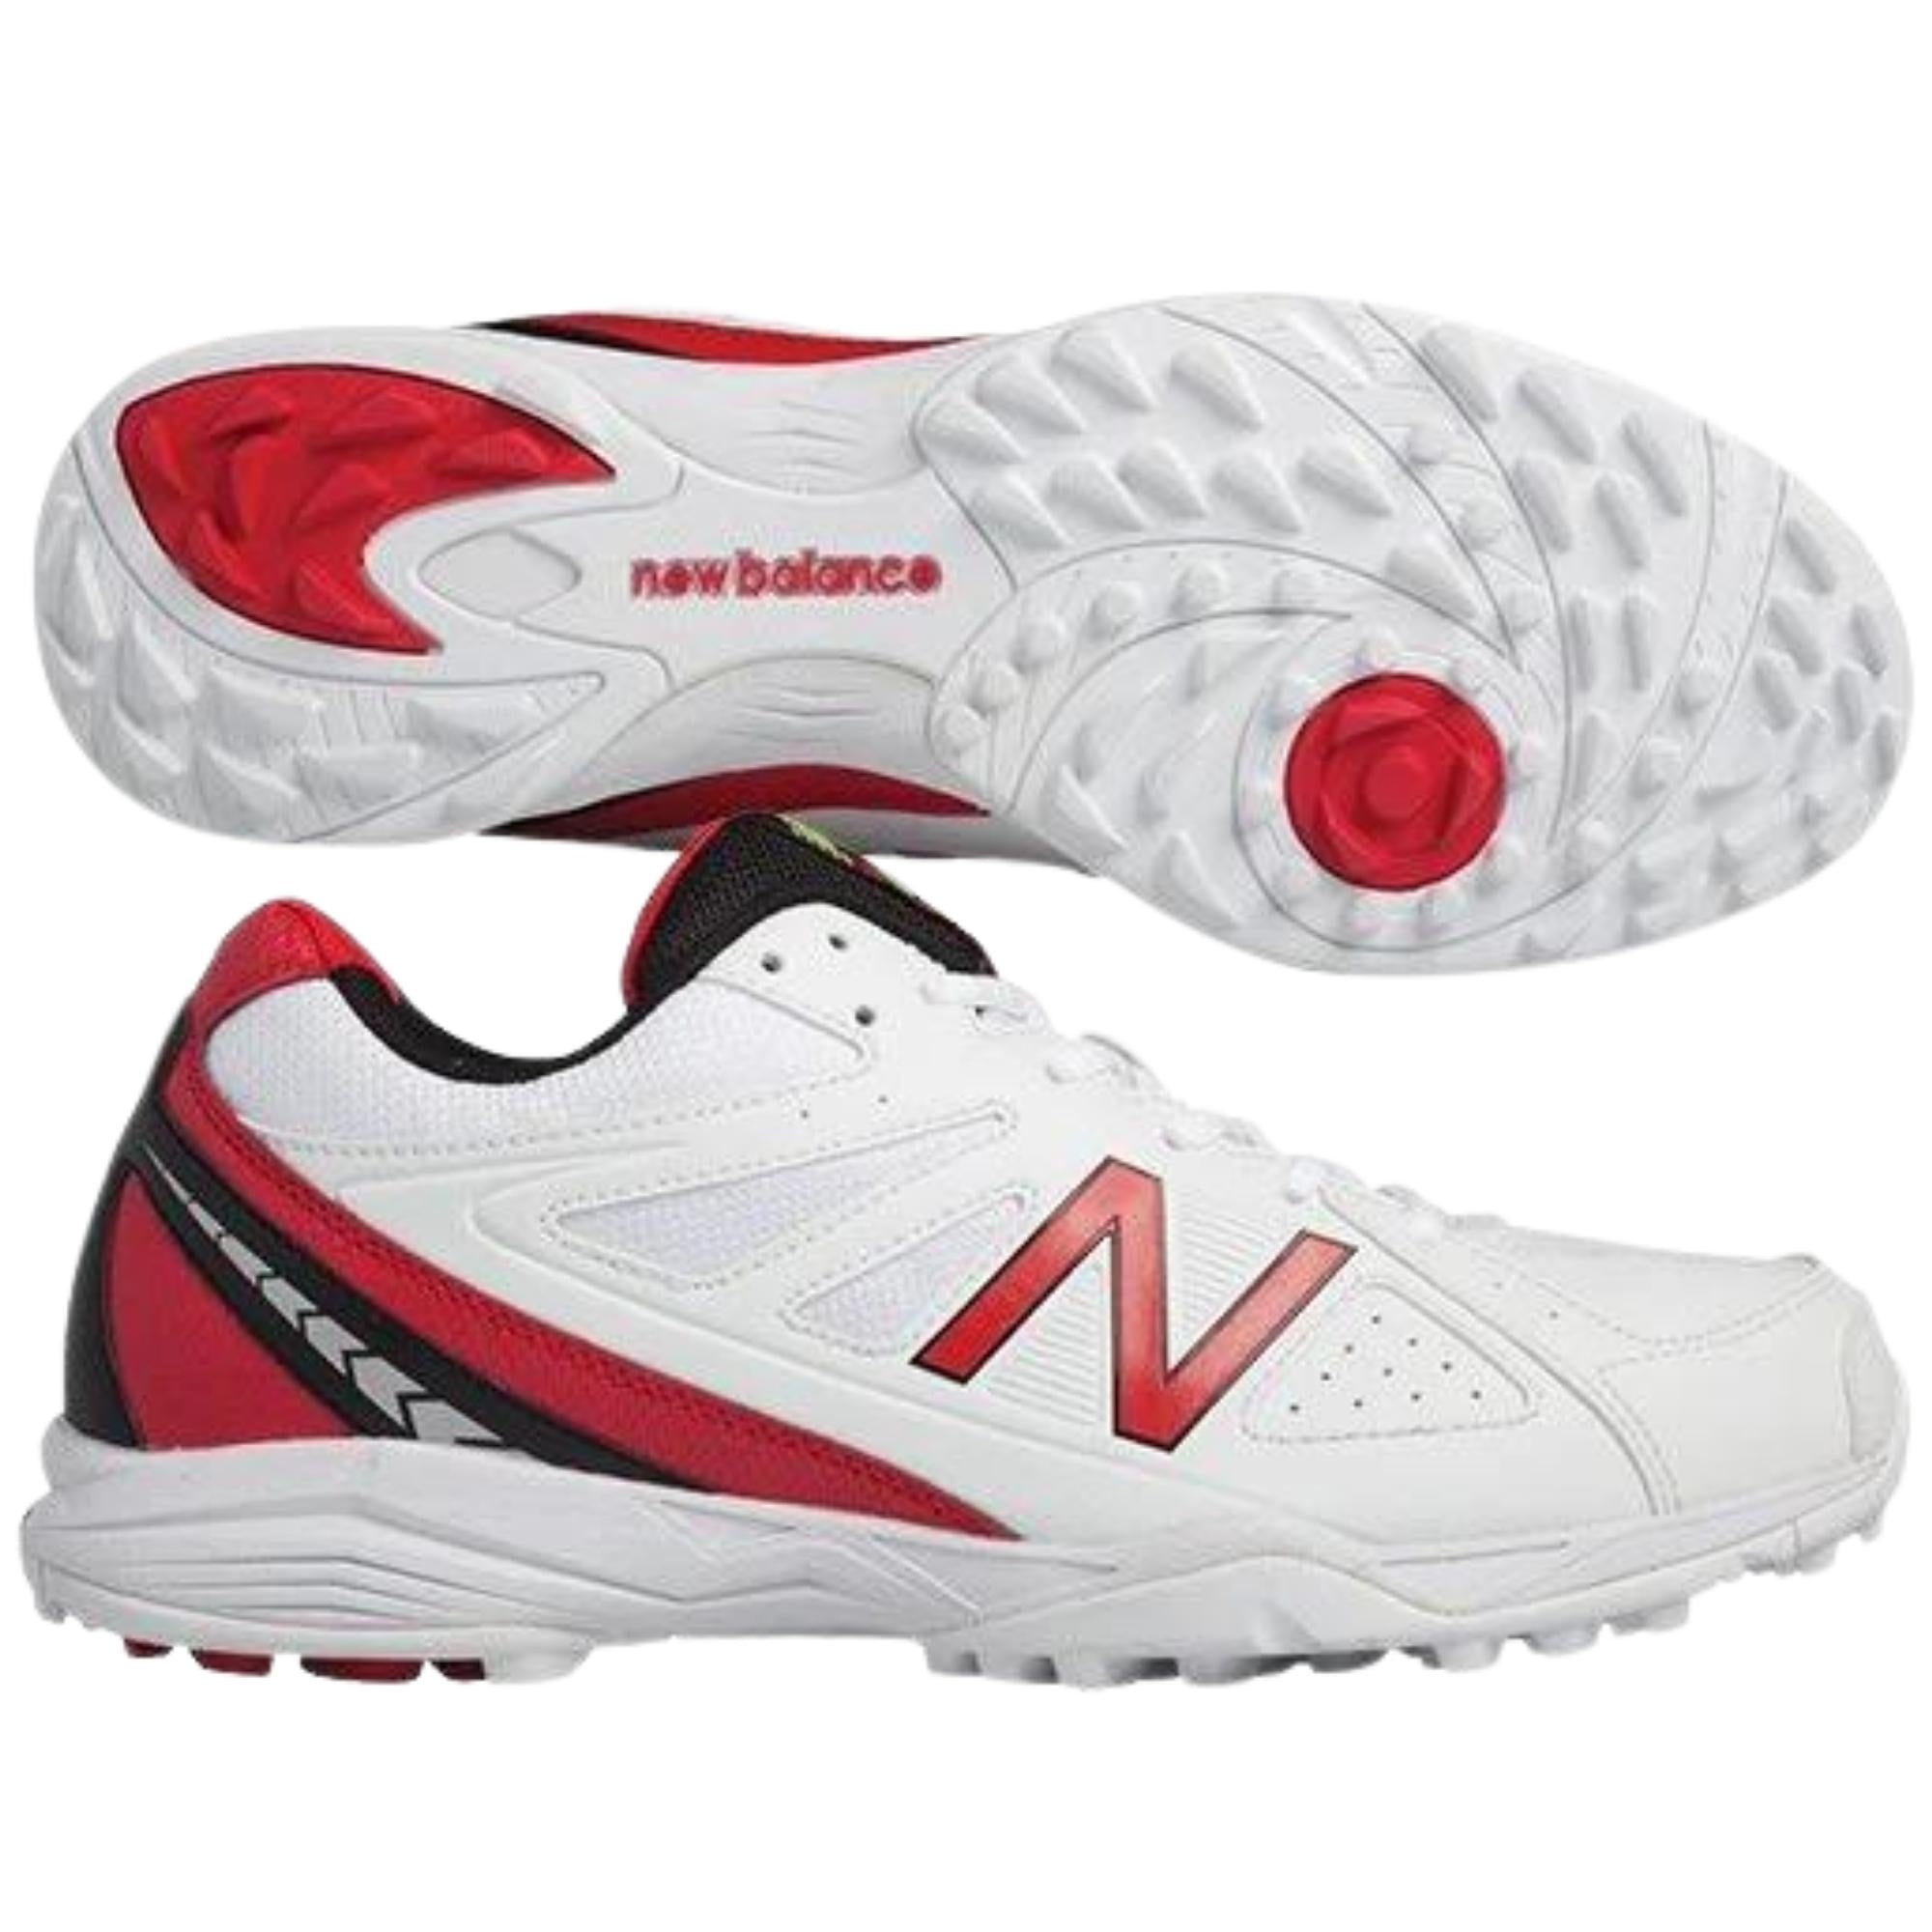 New Balance Cricket Shoes, Model CK4020R2 Rubber Sole Shoes - Red/White